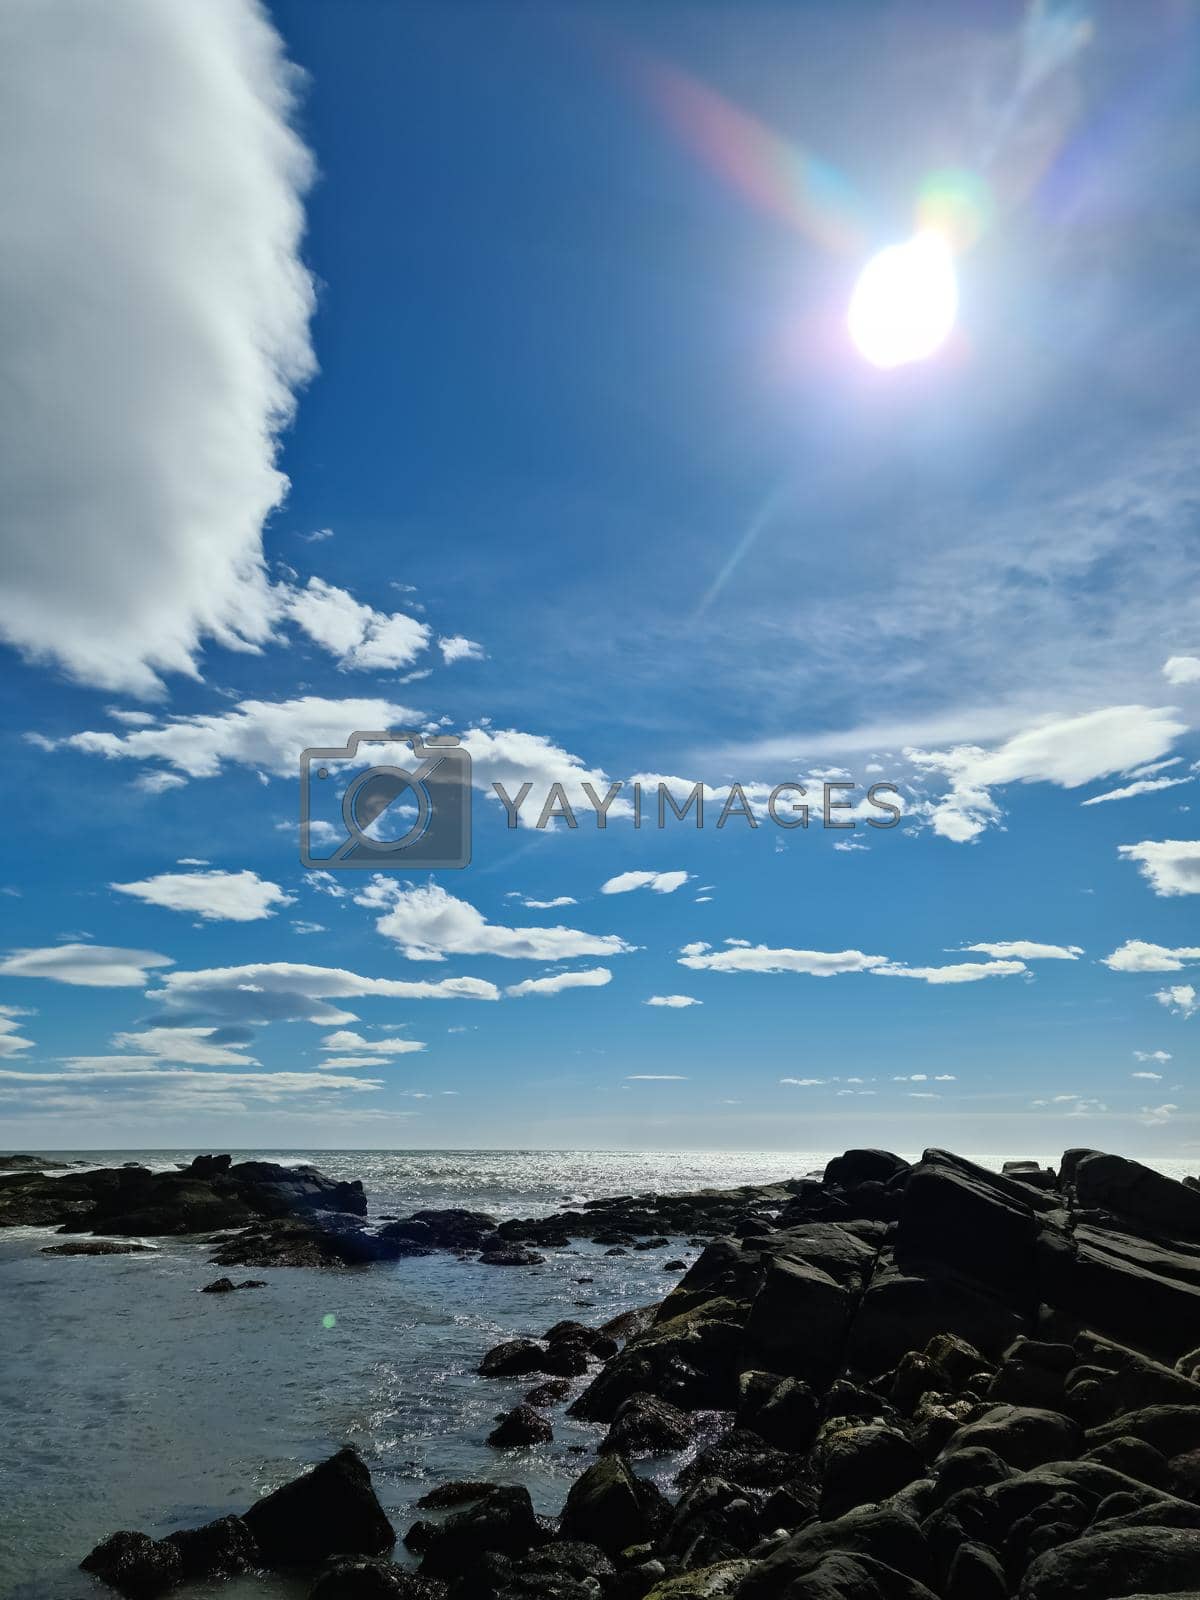 Royalty free image of A surf on a rocky beach with black sand in Iceland. by MP_foto71